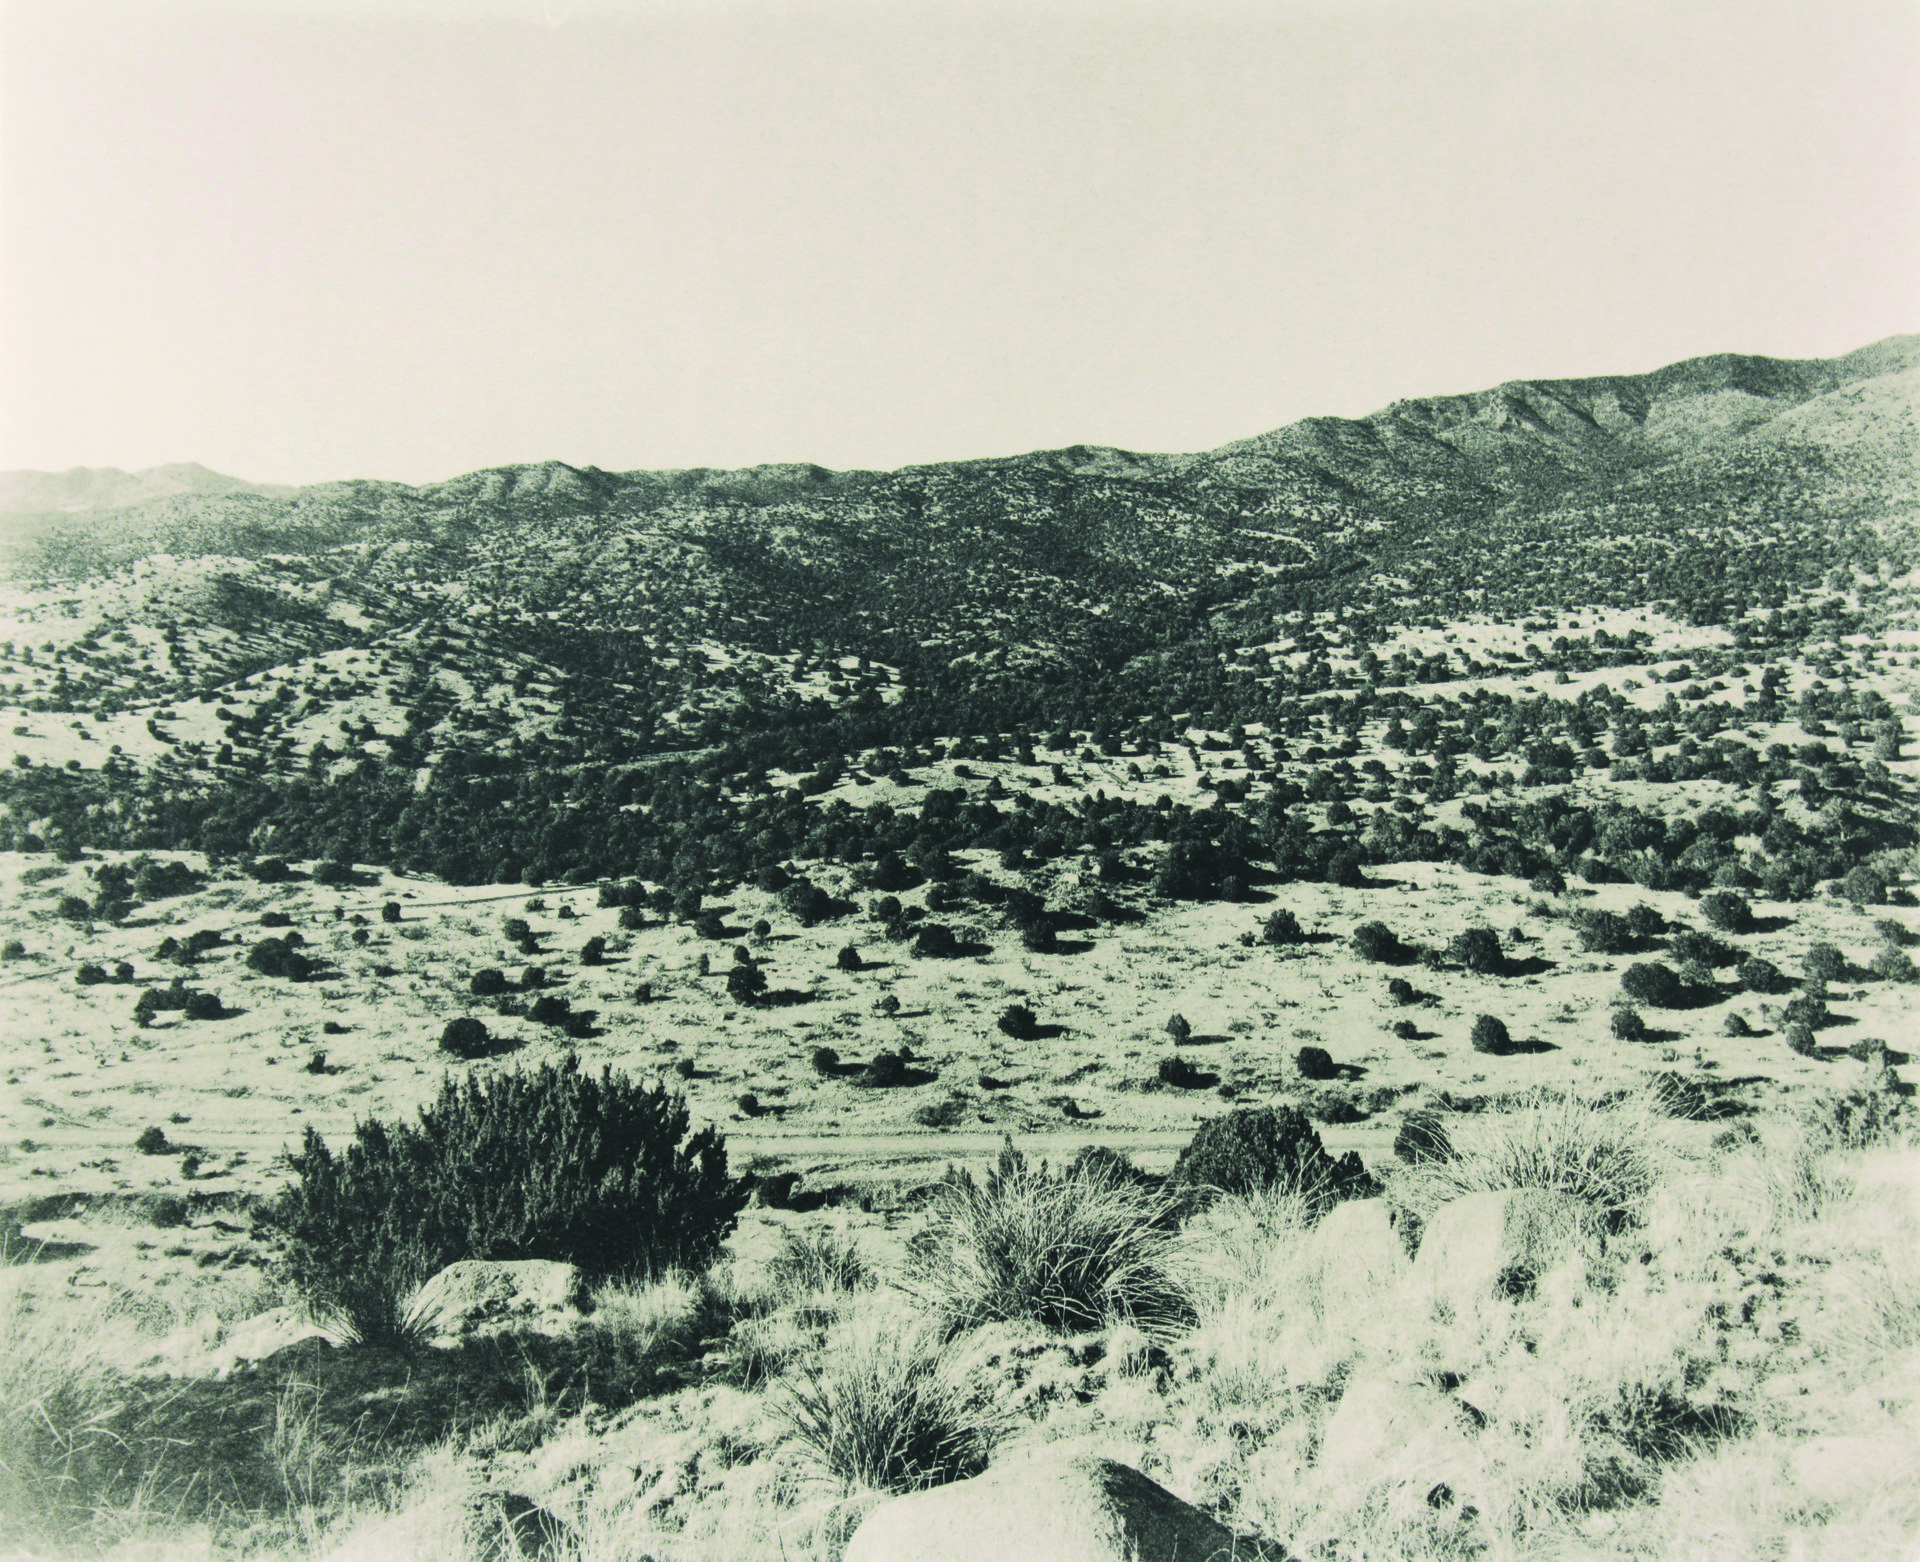 Gert and Uwe Tobias, untitled (n.d.), Courtesy of the artists